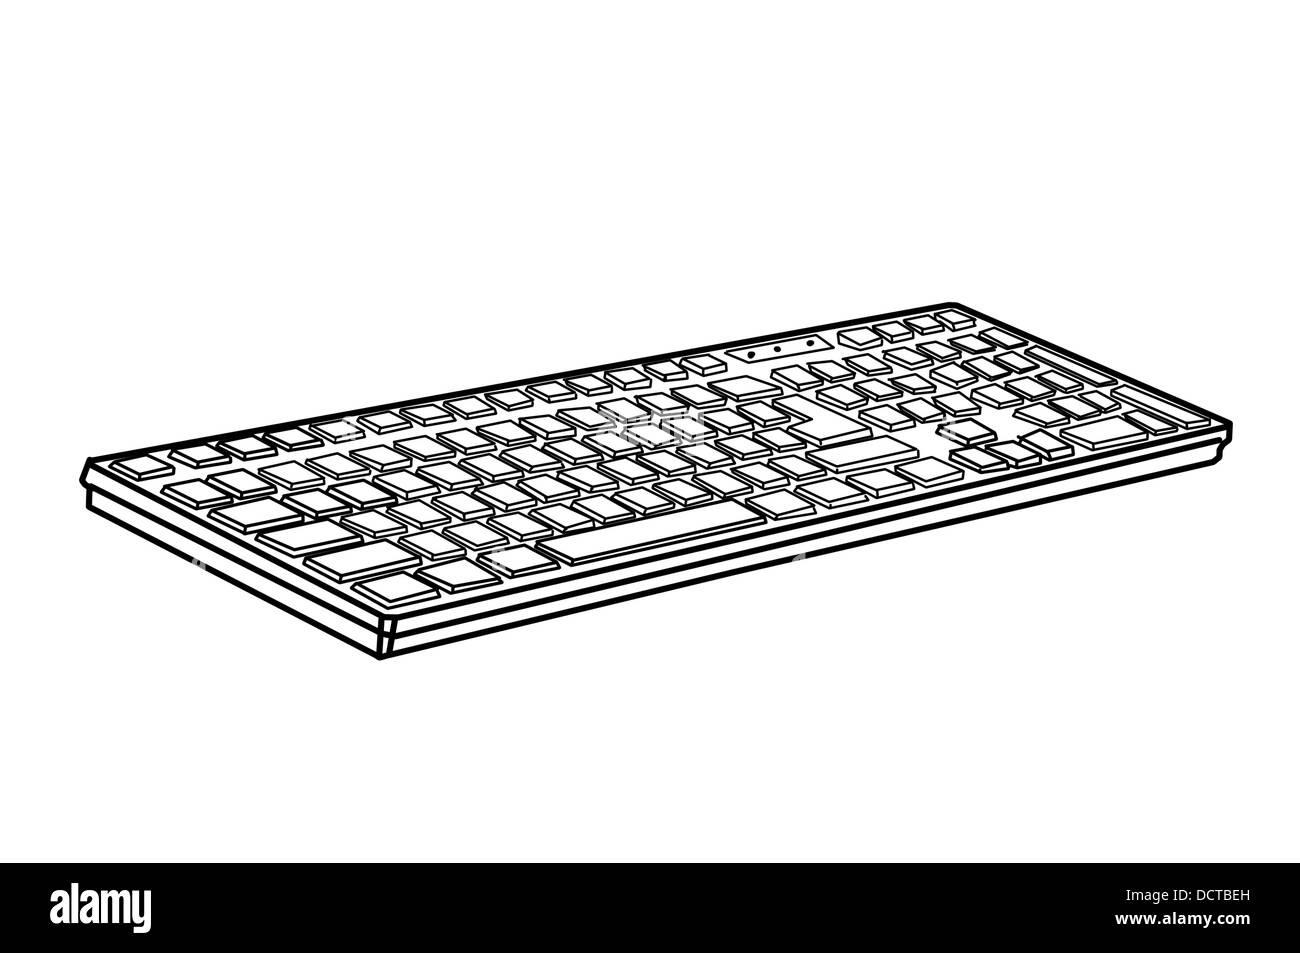 71,263 Keyboard Drawing Images, Stock Photos & Vectors | Shutterstock